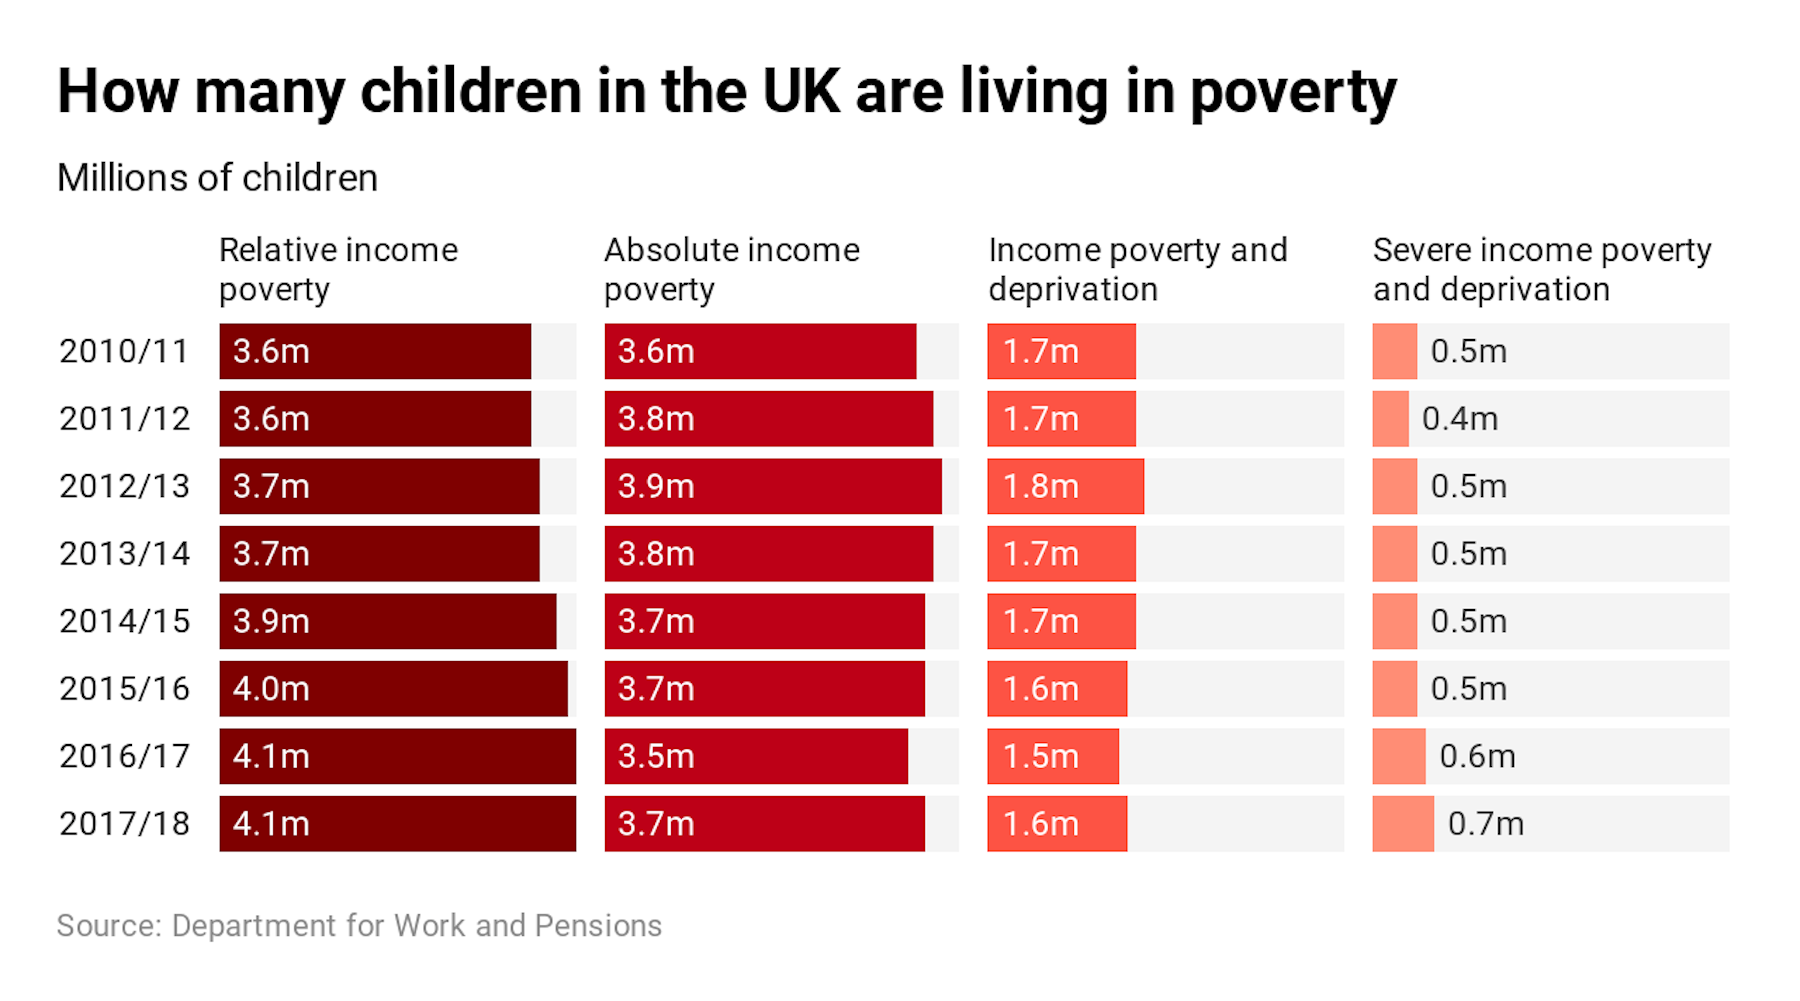 Are there 400,000 fewer children in poverty in the UK than there were